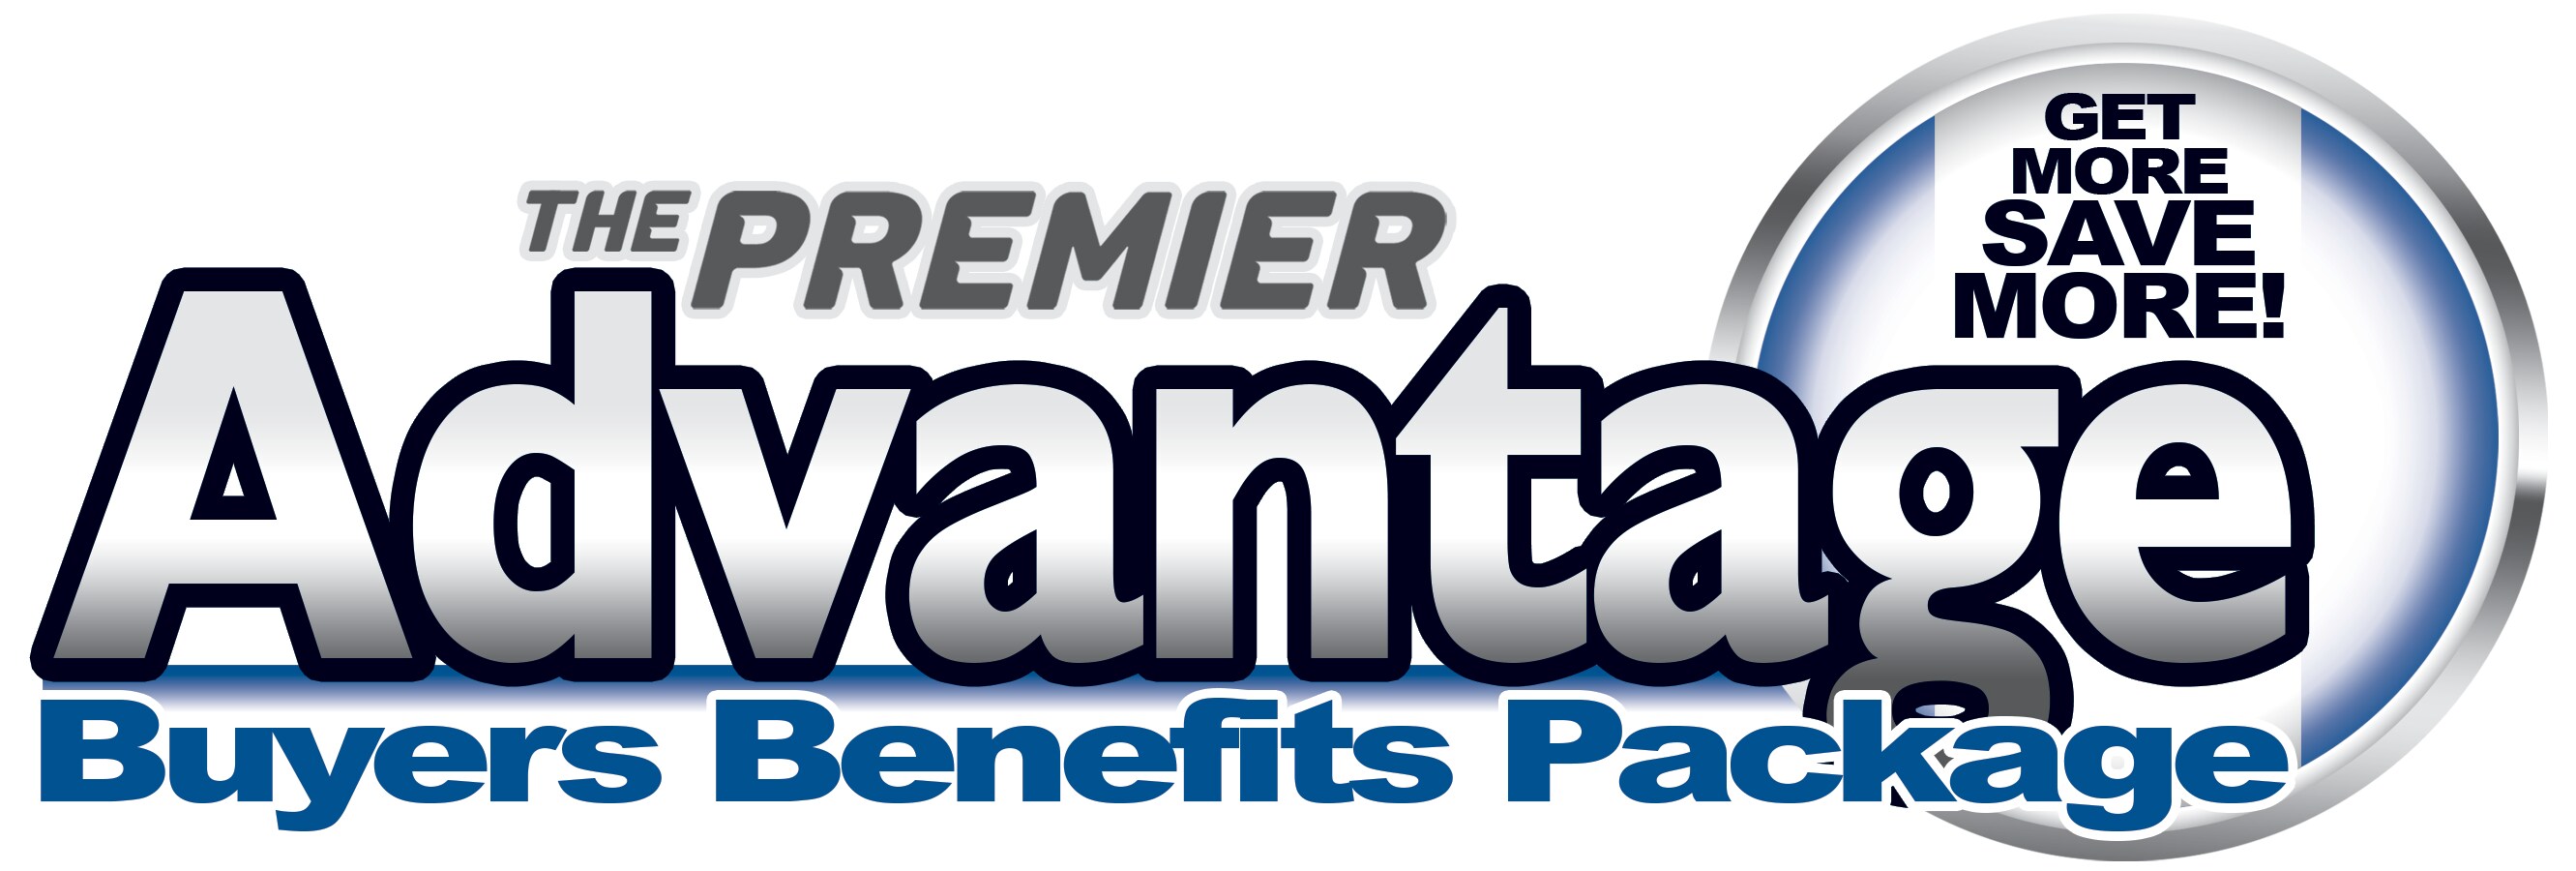 Get the Buyers Benefits package only at Premier